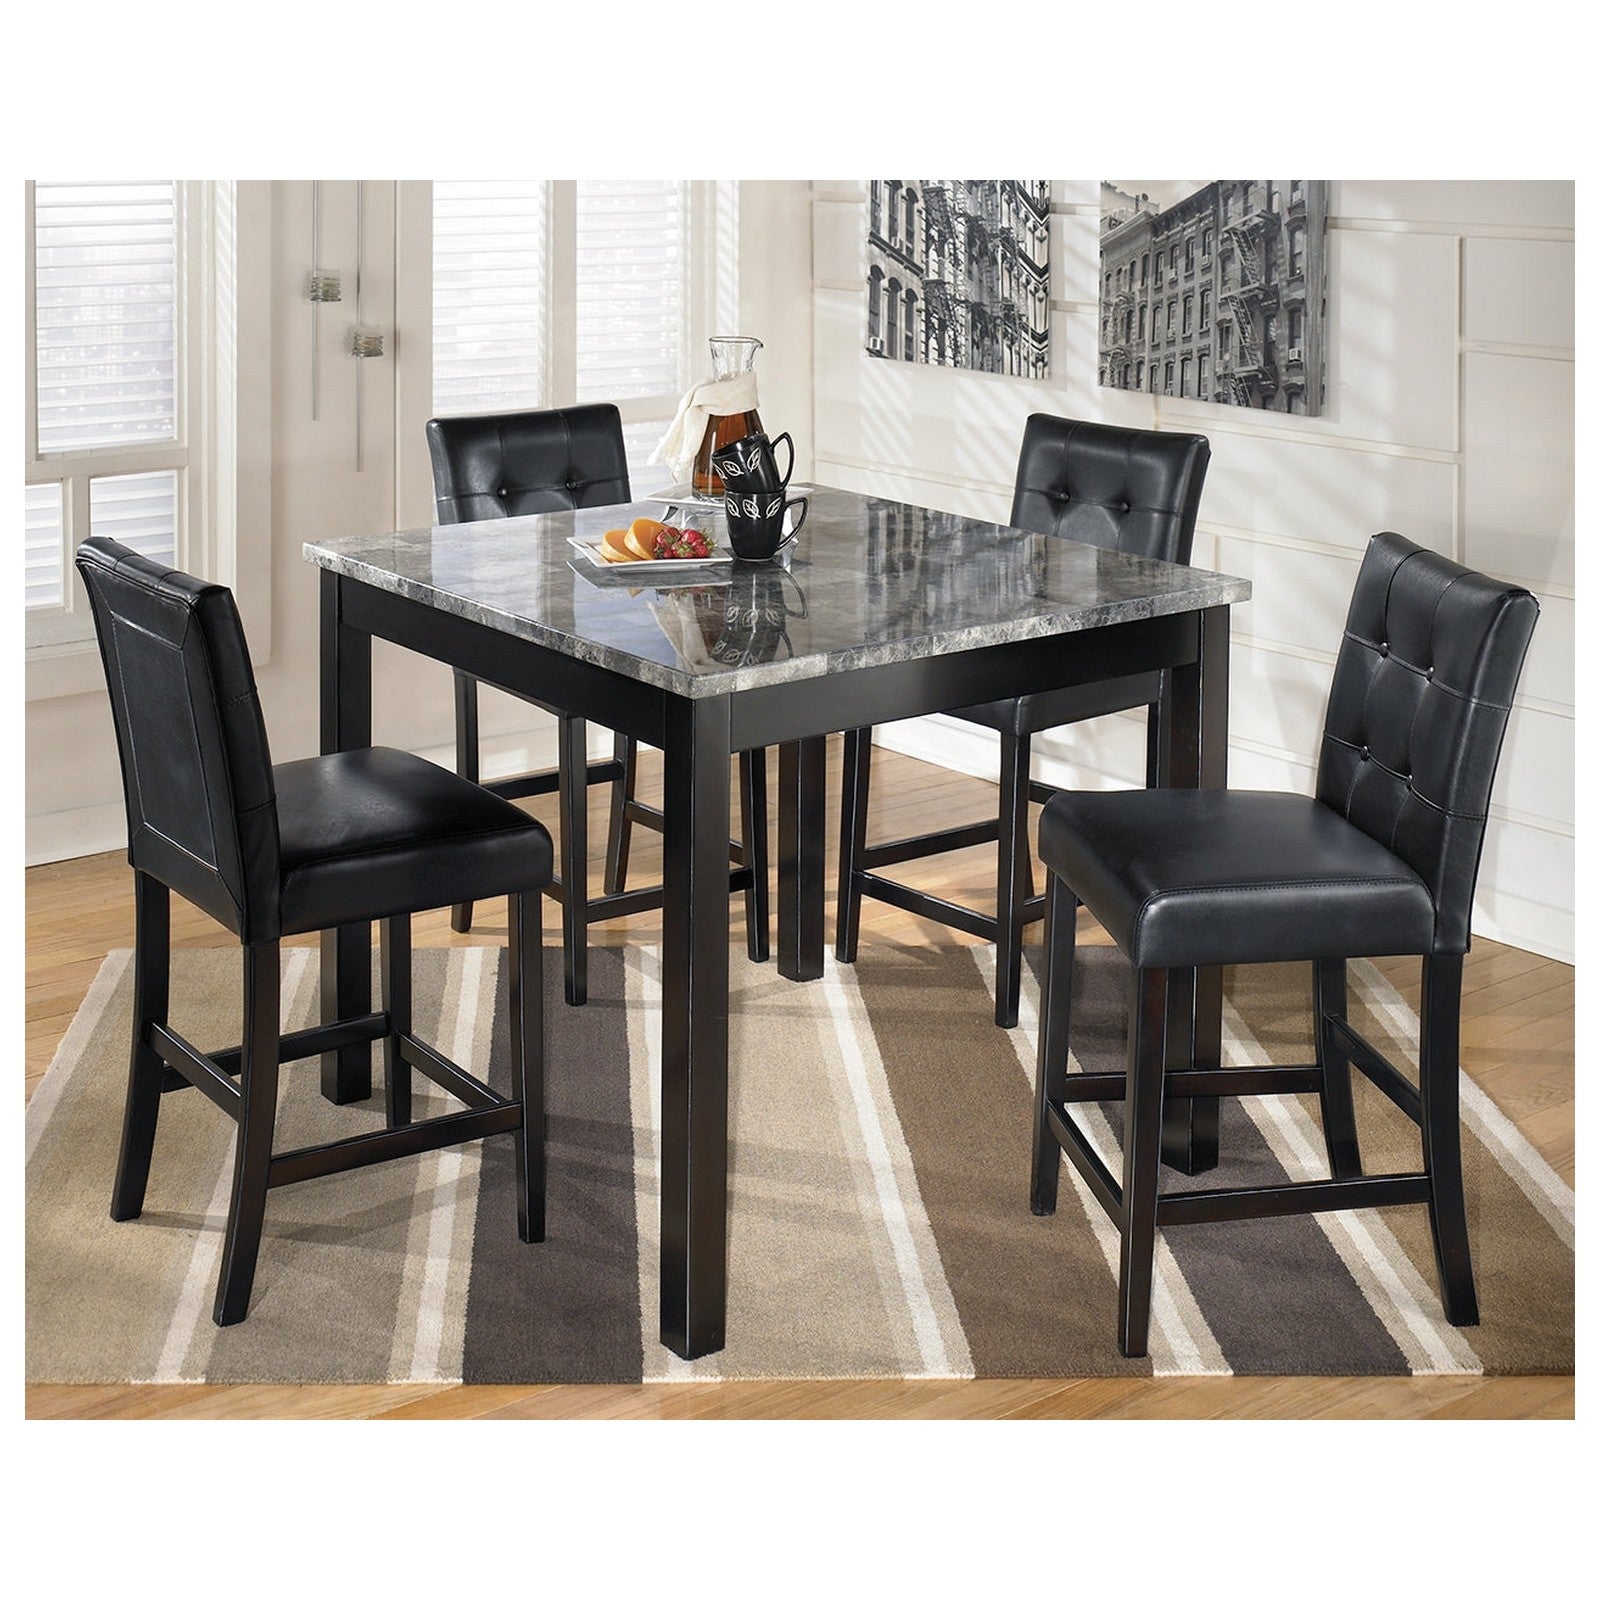 Maysville Counter Height Dining Table and Bar Stools (Set of 5) Ash-D154-223